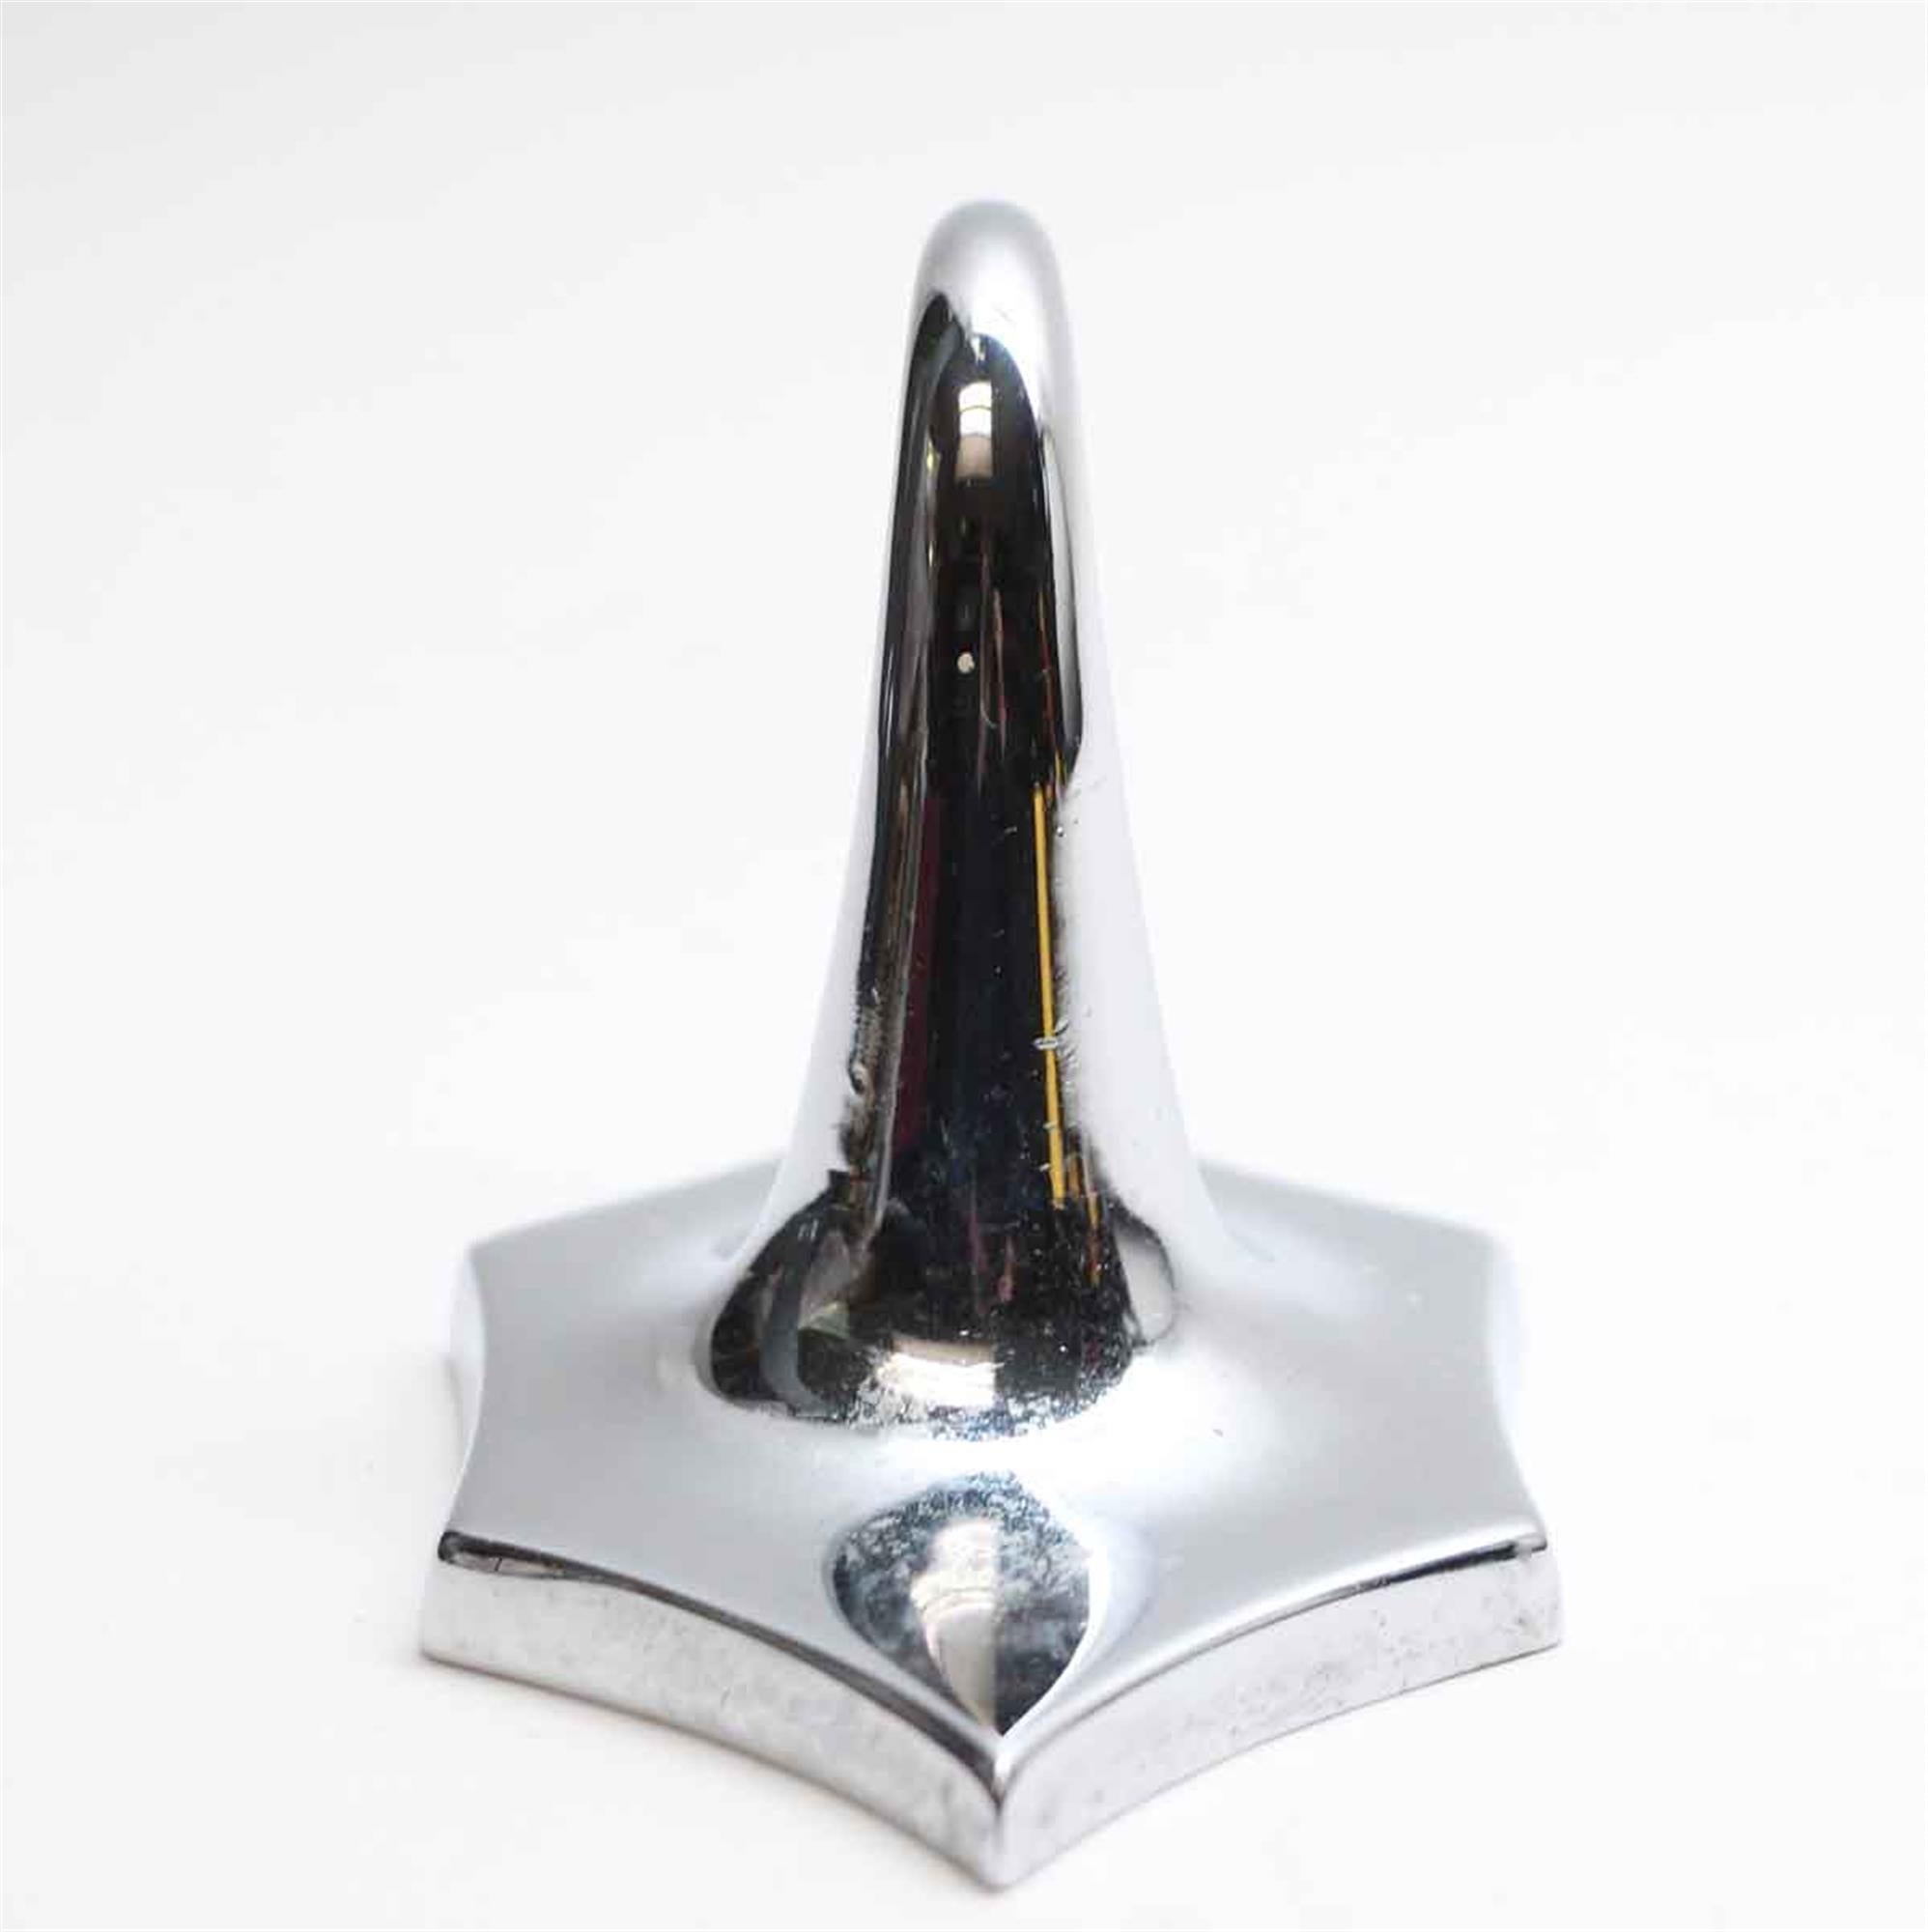 Chrome-plated brass hook from 1931 from the NYC Waldorf Astoria Hotel. Matching towel bar is also available separately. This item is original to the Waldorf Astoria Towers. Waldorf Astoria authenticity card included with your purchase. Small